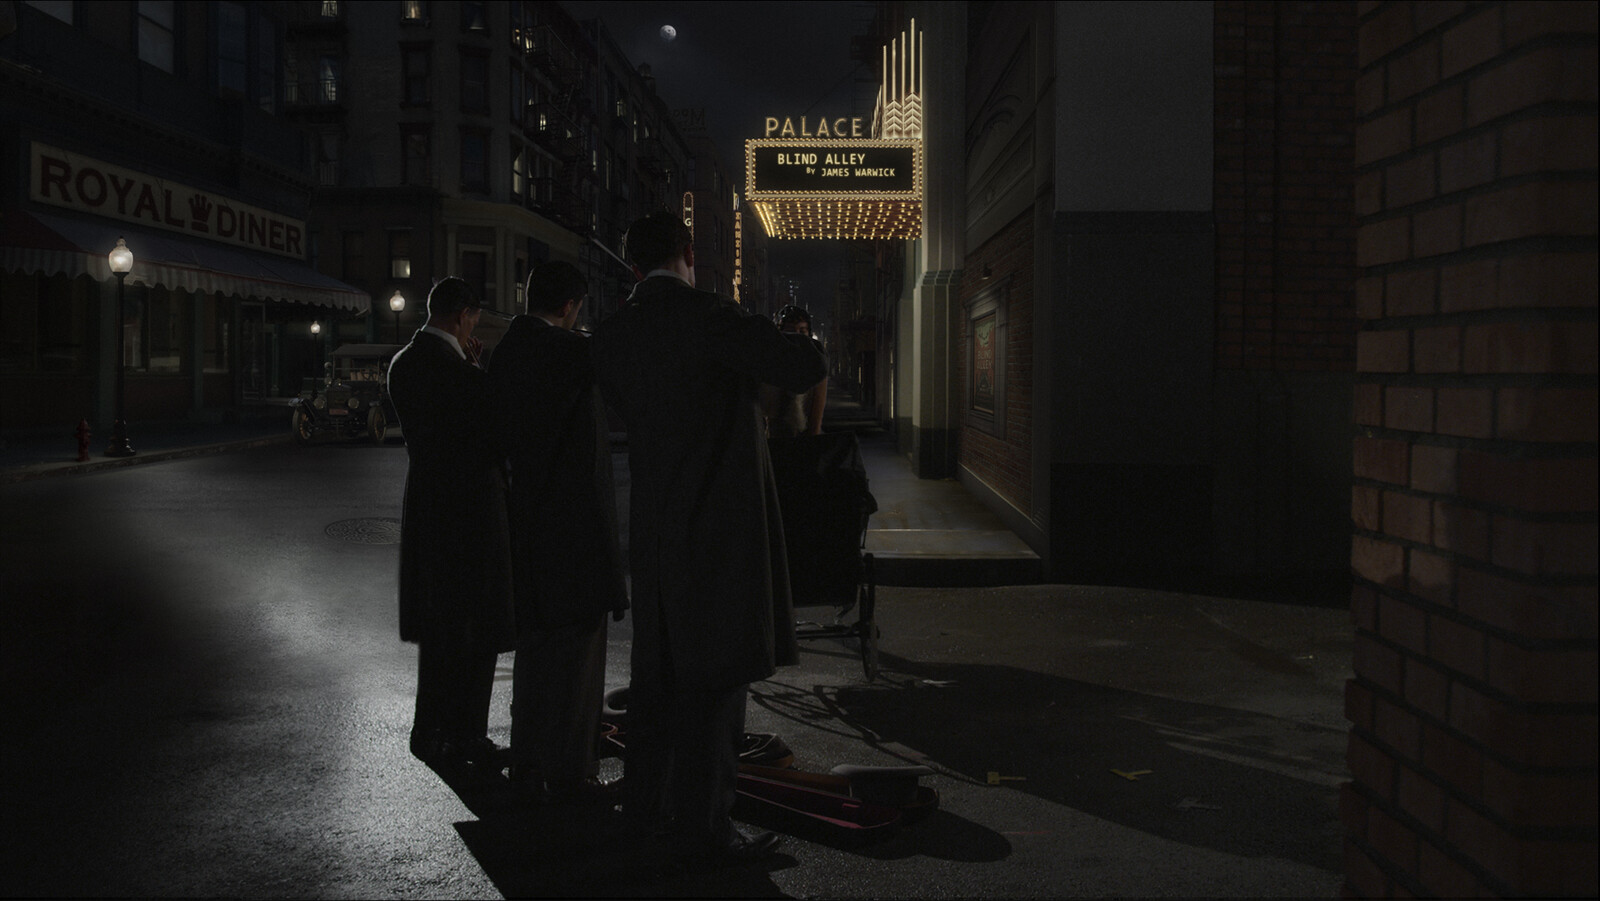 Post-production concept for night time Broadway St in 1940s time period